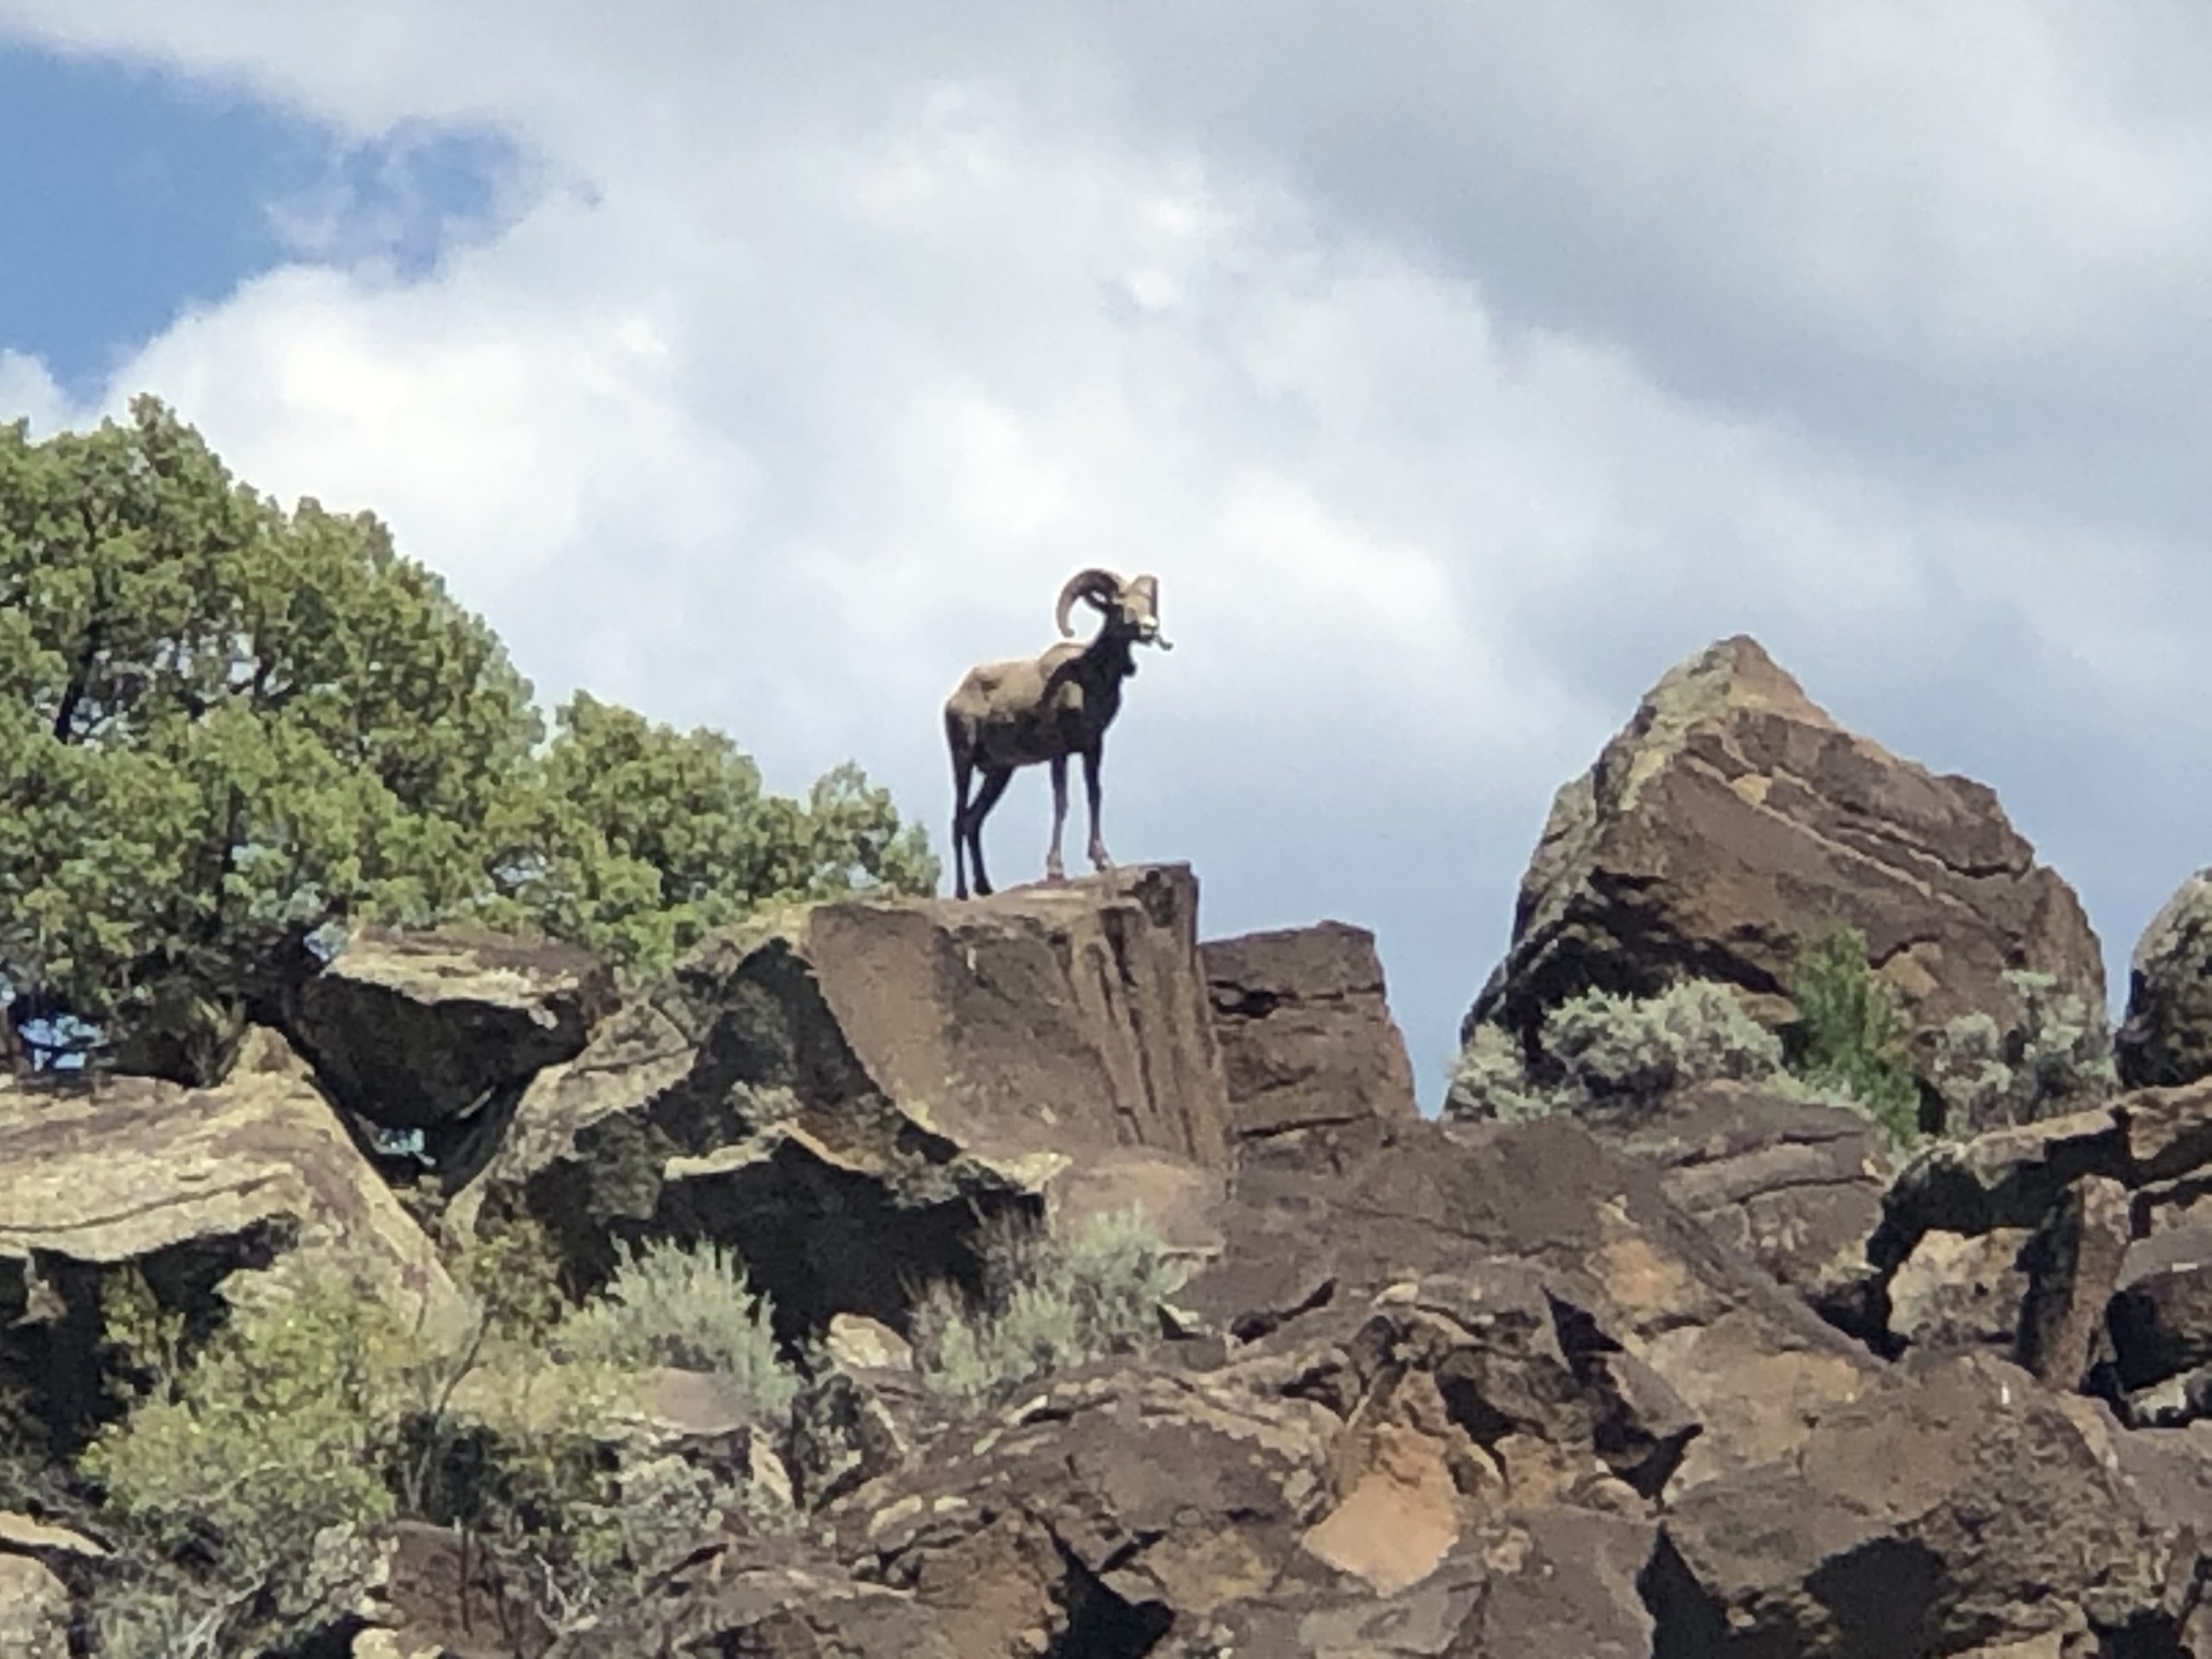 A Blessing From The Bighorn Sheep